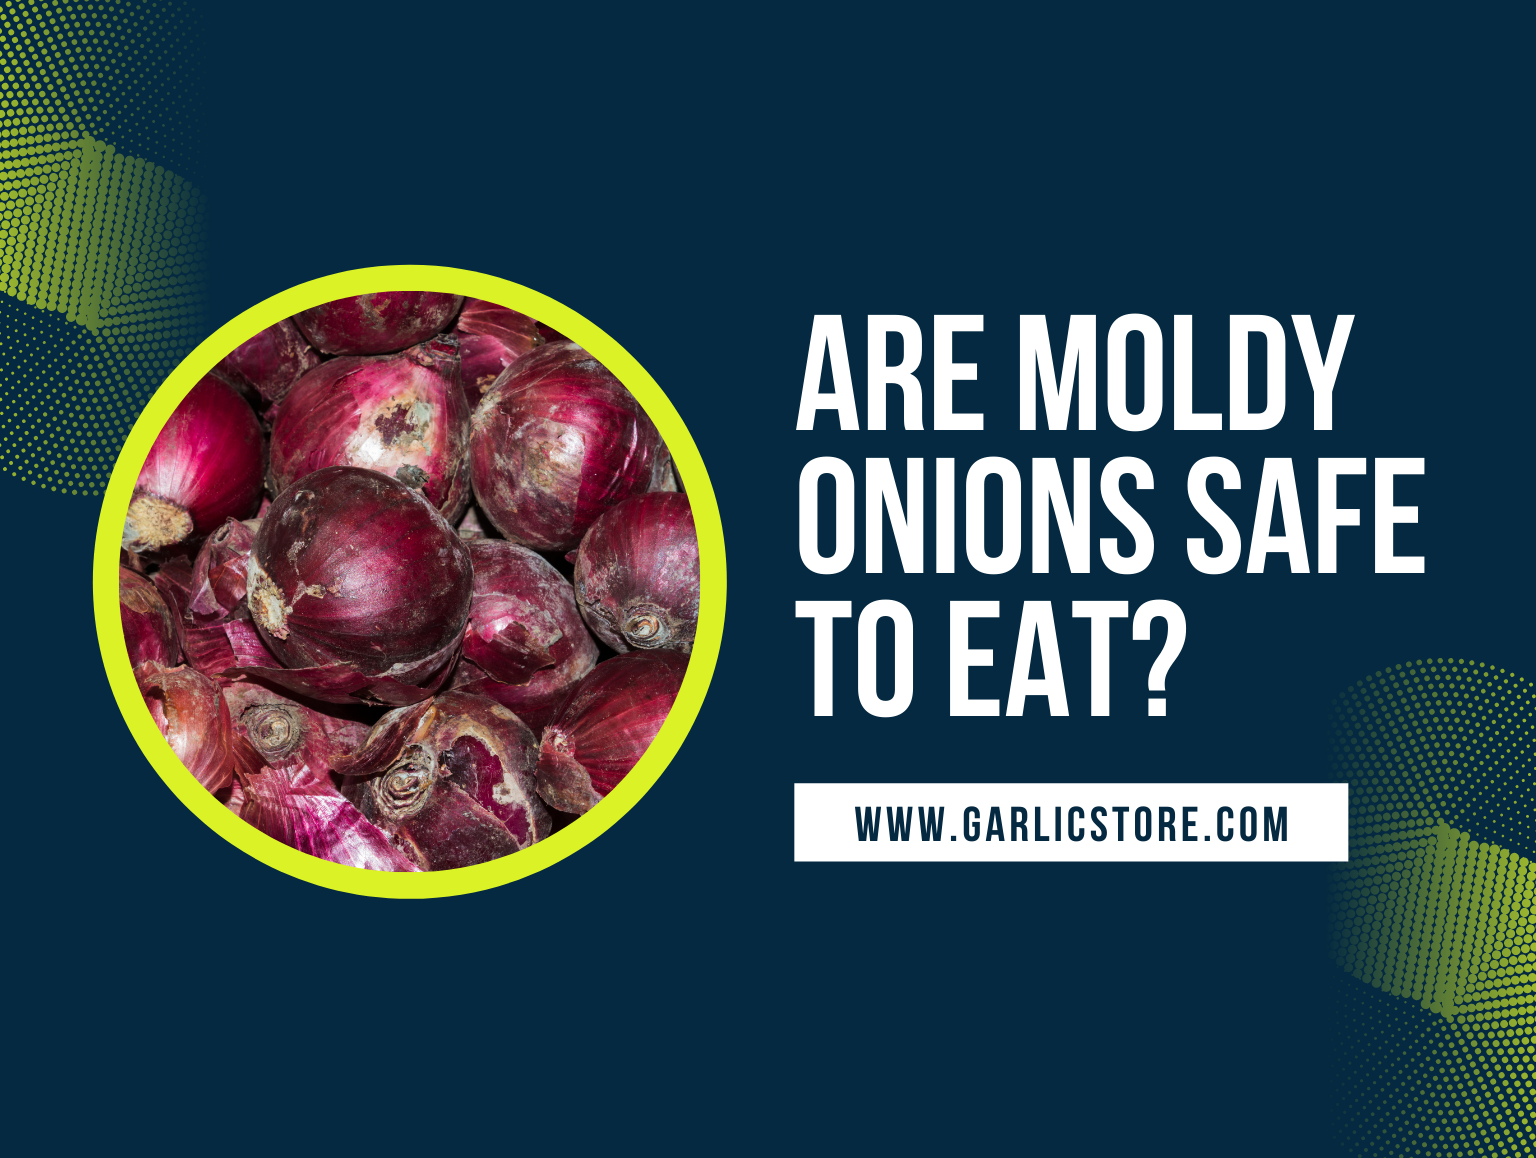 Are Moldy Onions Safe to Eat